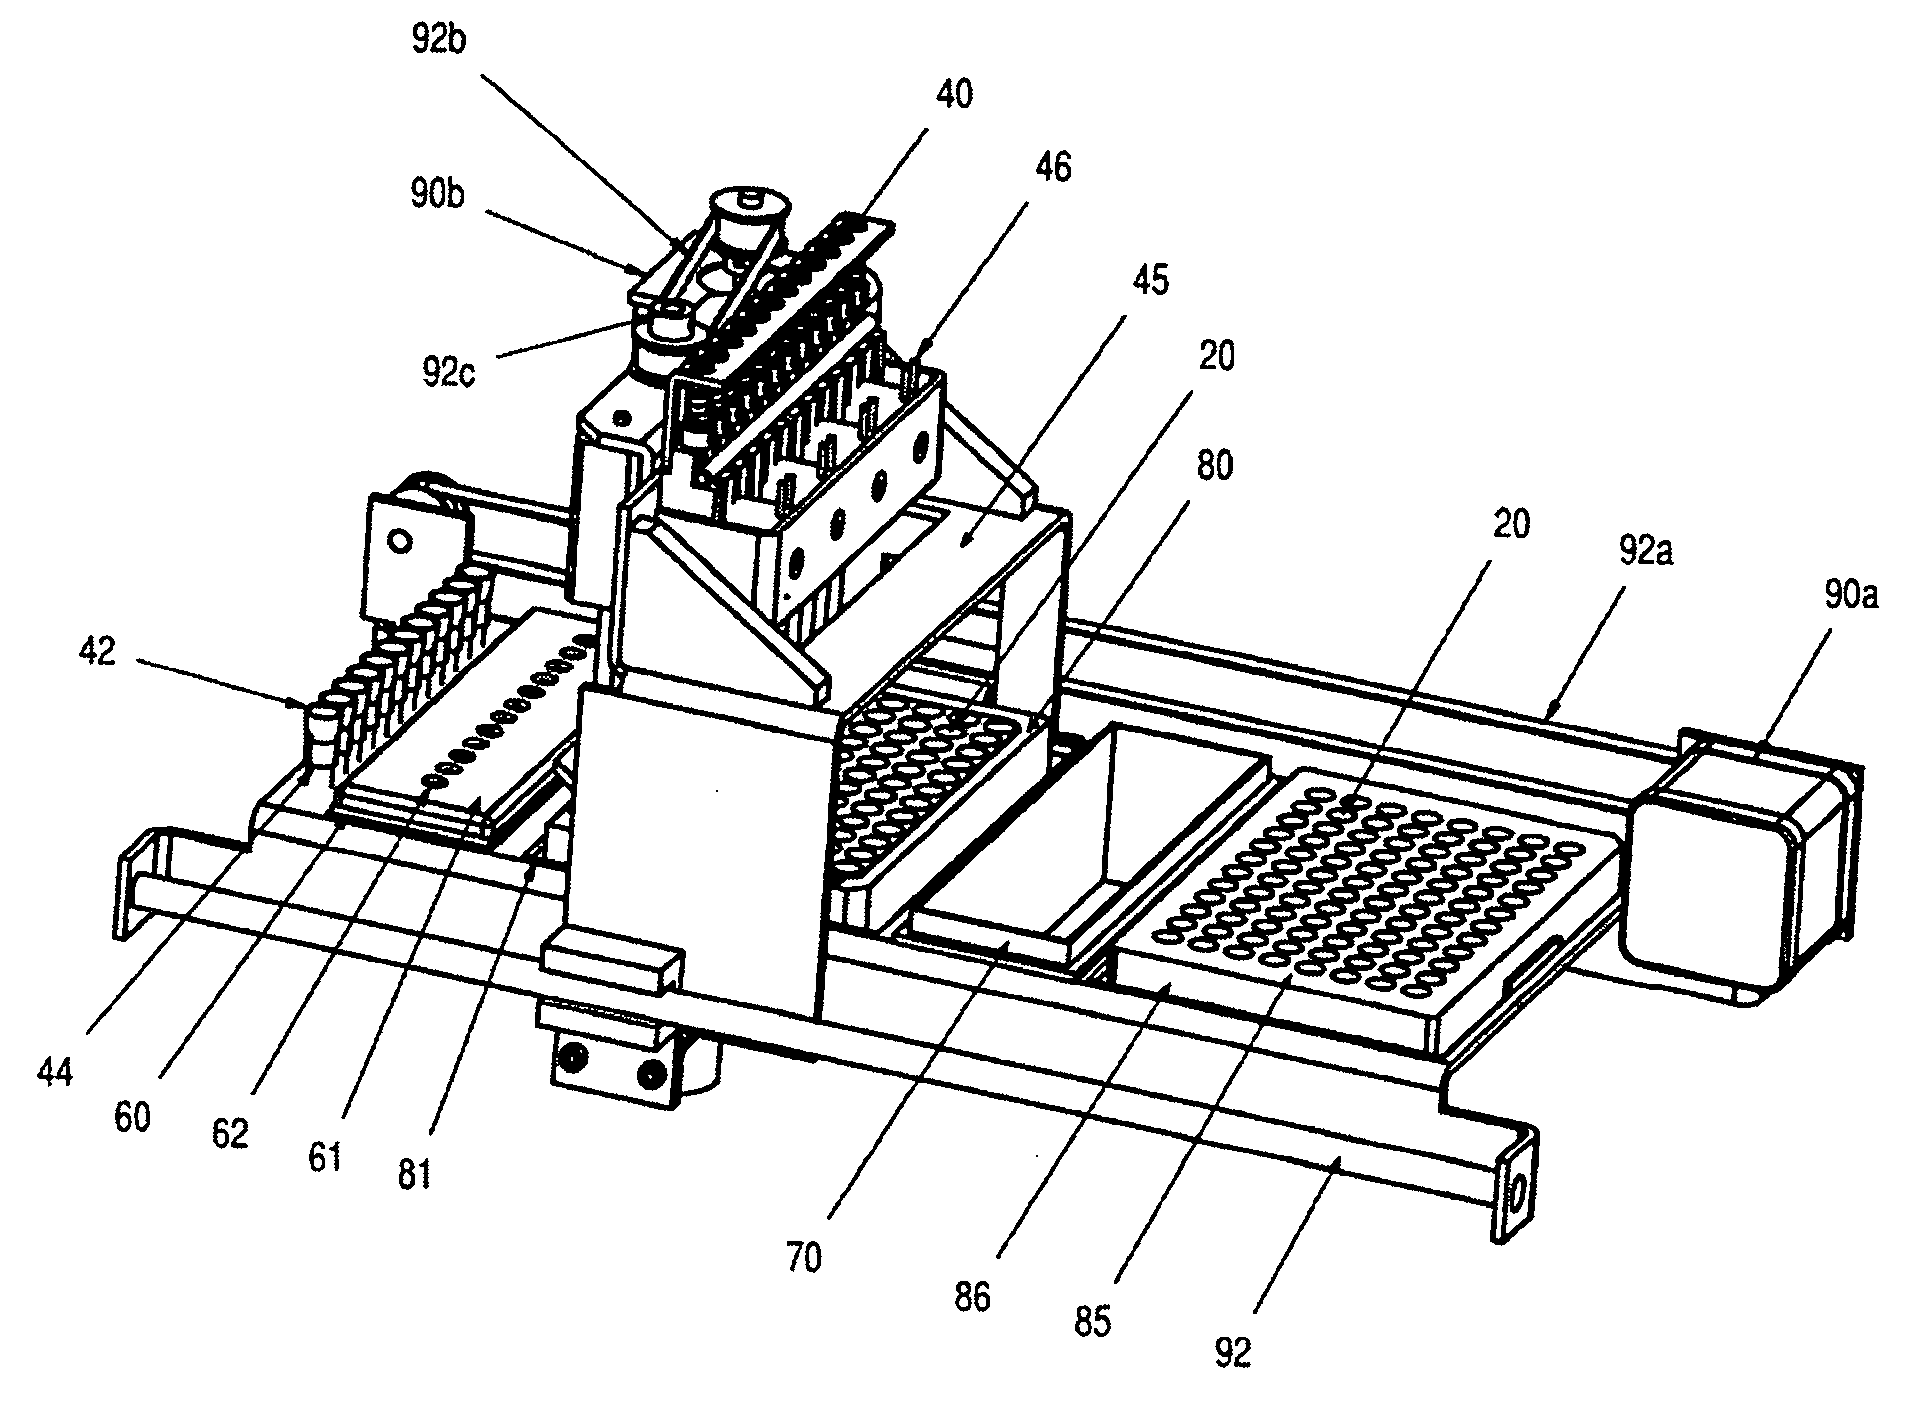 Apparatus and method for the purification of biomolecules